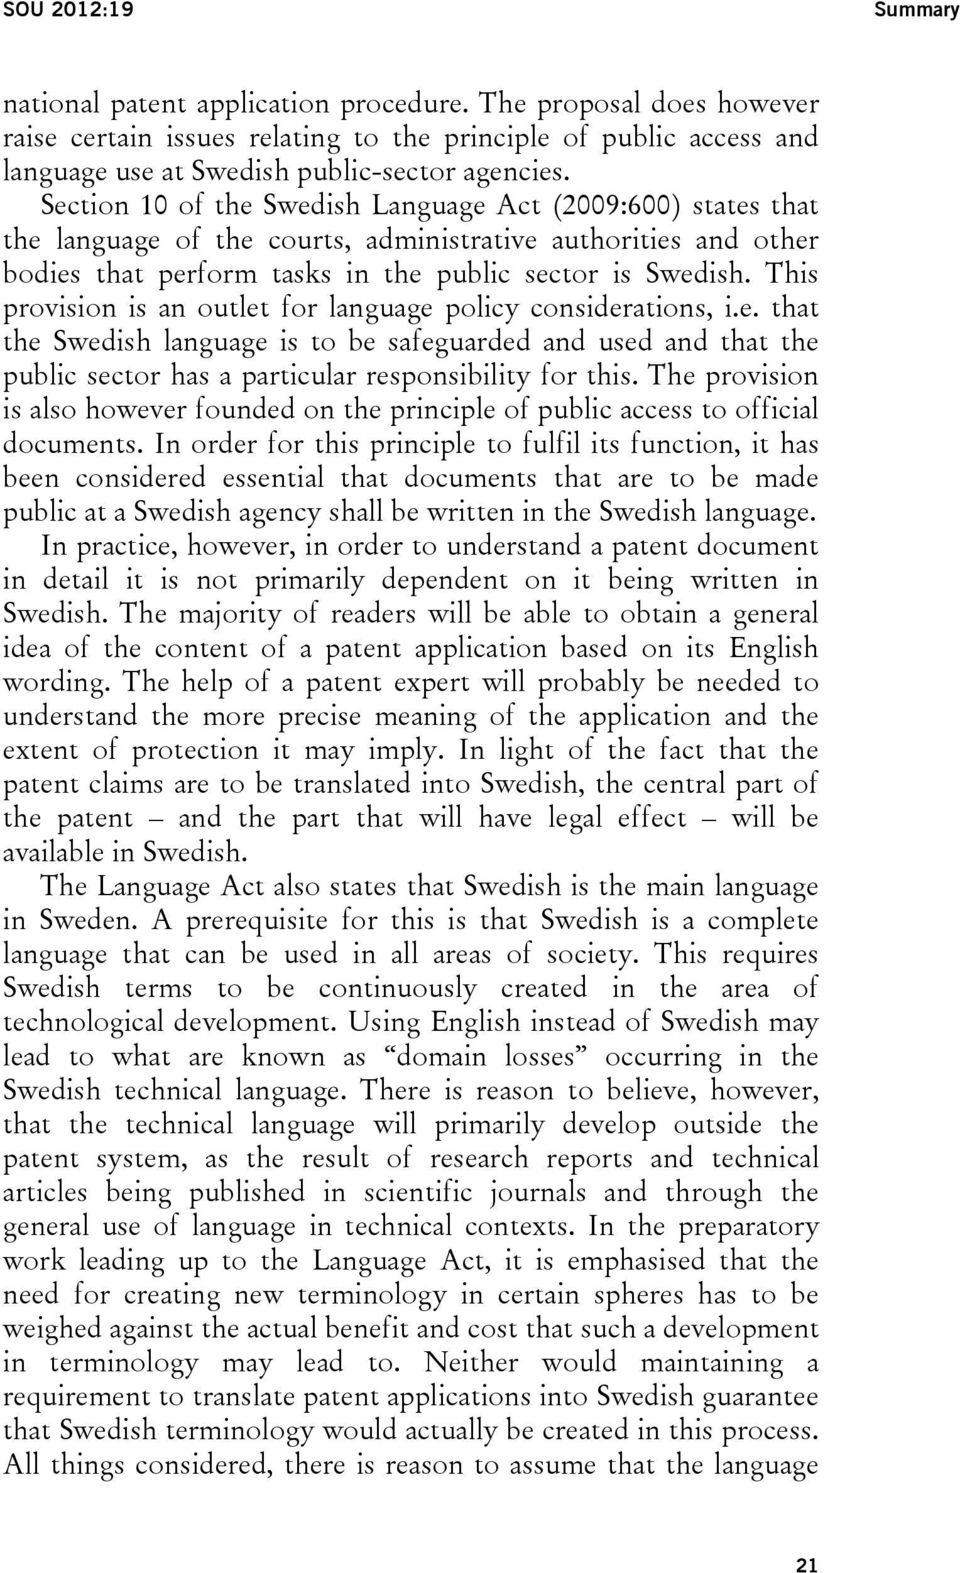 This provision is an outlet for language policy considerations, i.e. that the Swedish language is to be safeguarded and used and that the public sector has a particular responsibility for this.